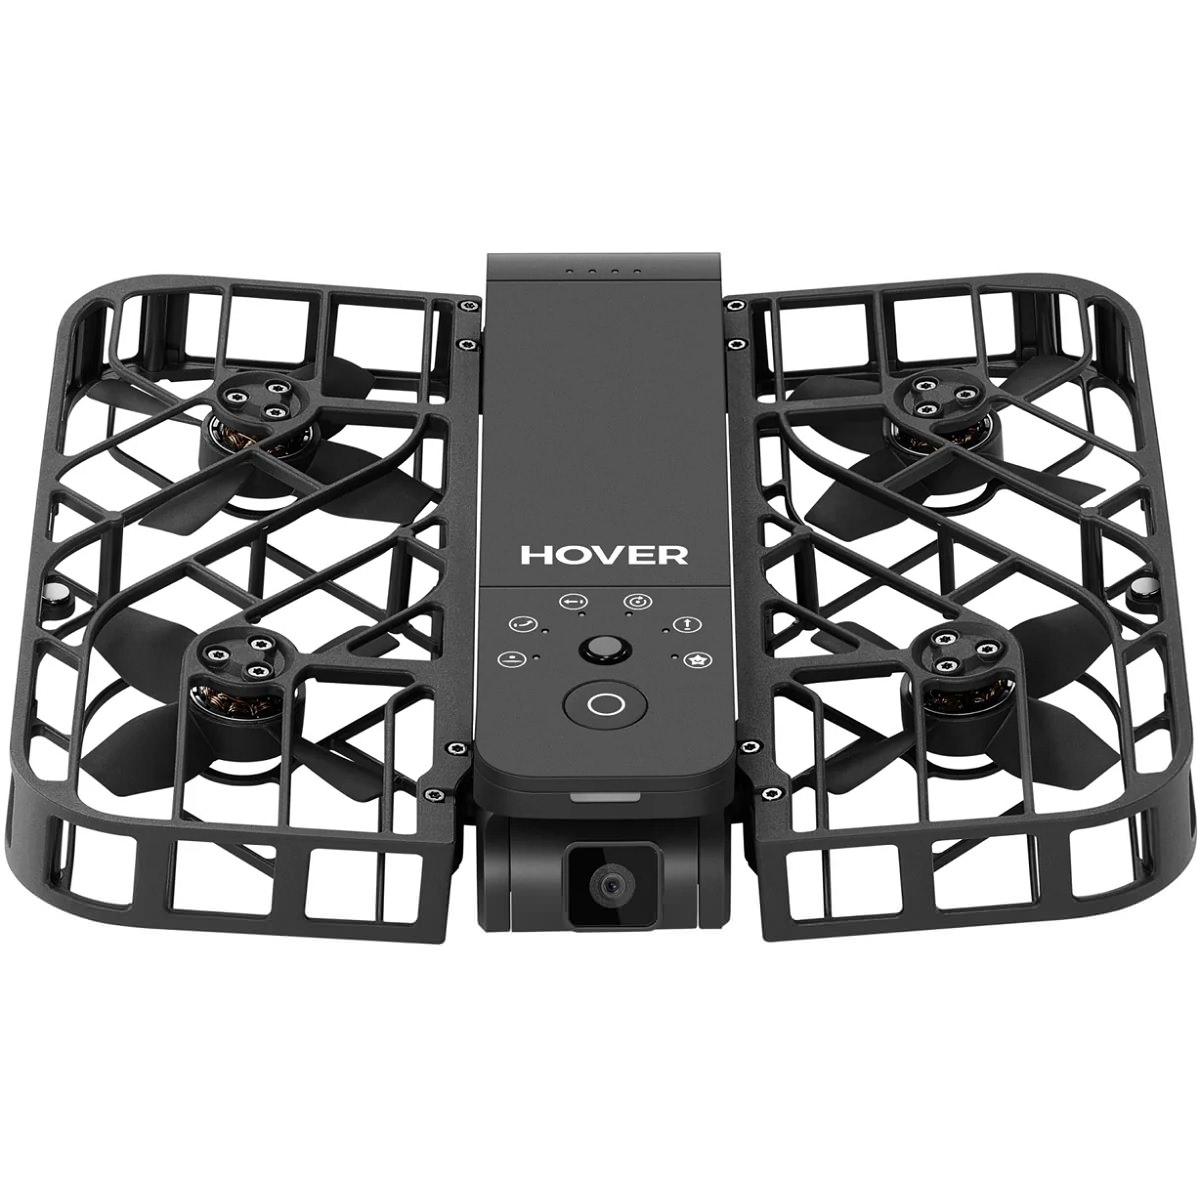 HOVERAir X1 Pocket-Sized Self-Flying Camera Mini Drone For Selfie Action  Camera Hover Air X1 As Christmas Present Birthday Gift - AliExpress